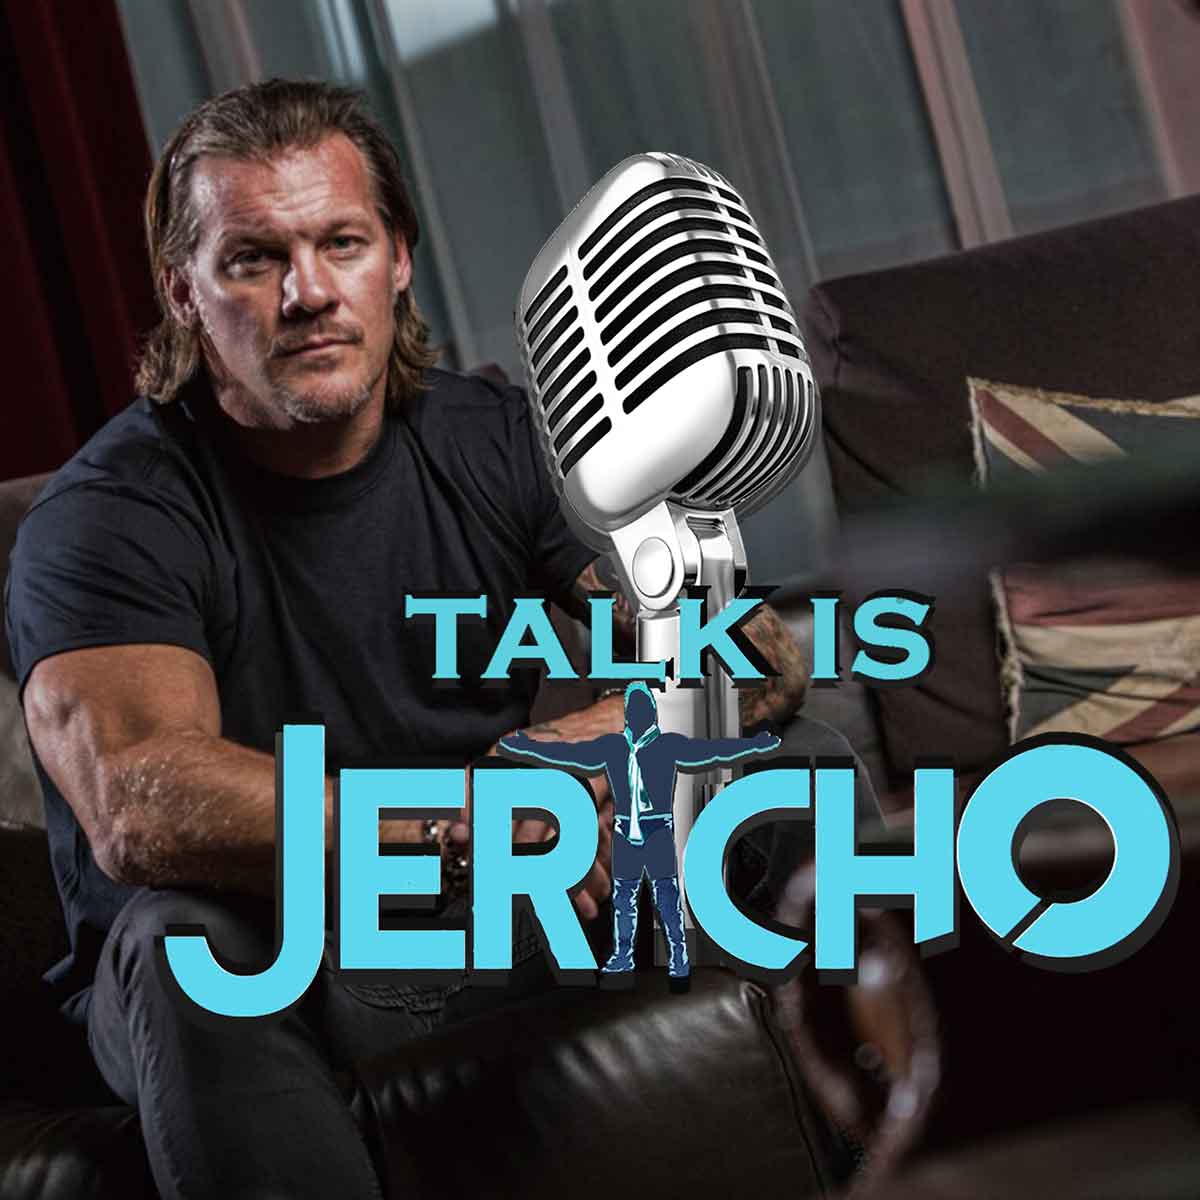 “THE GIFT OF JERICHO” COMES TO WESTWOOD ONE SIX-TIME ….